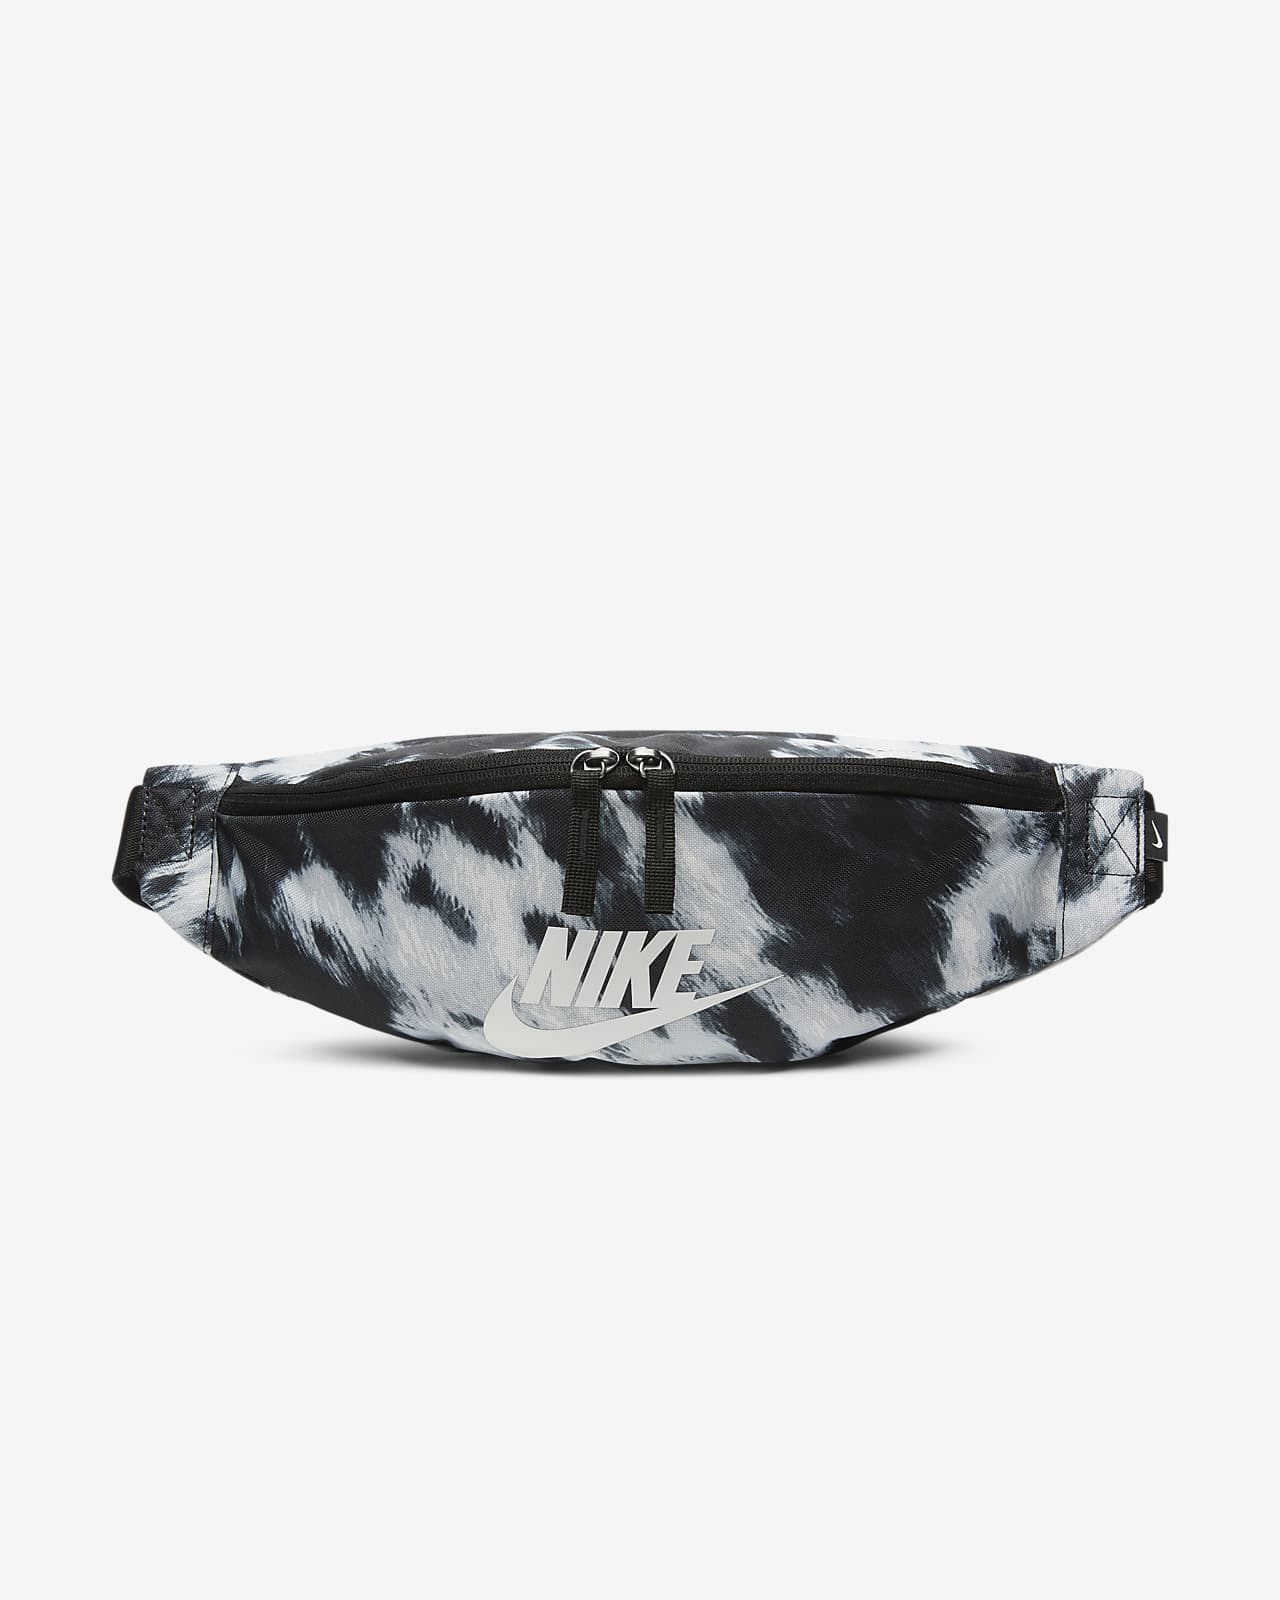 nike heritage fanny pack